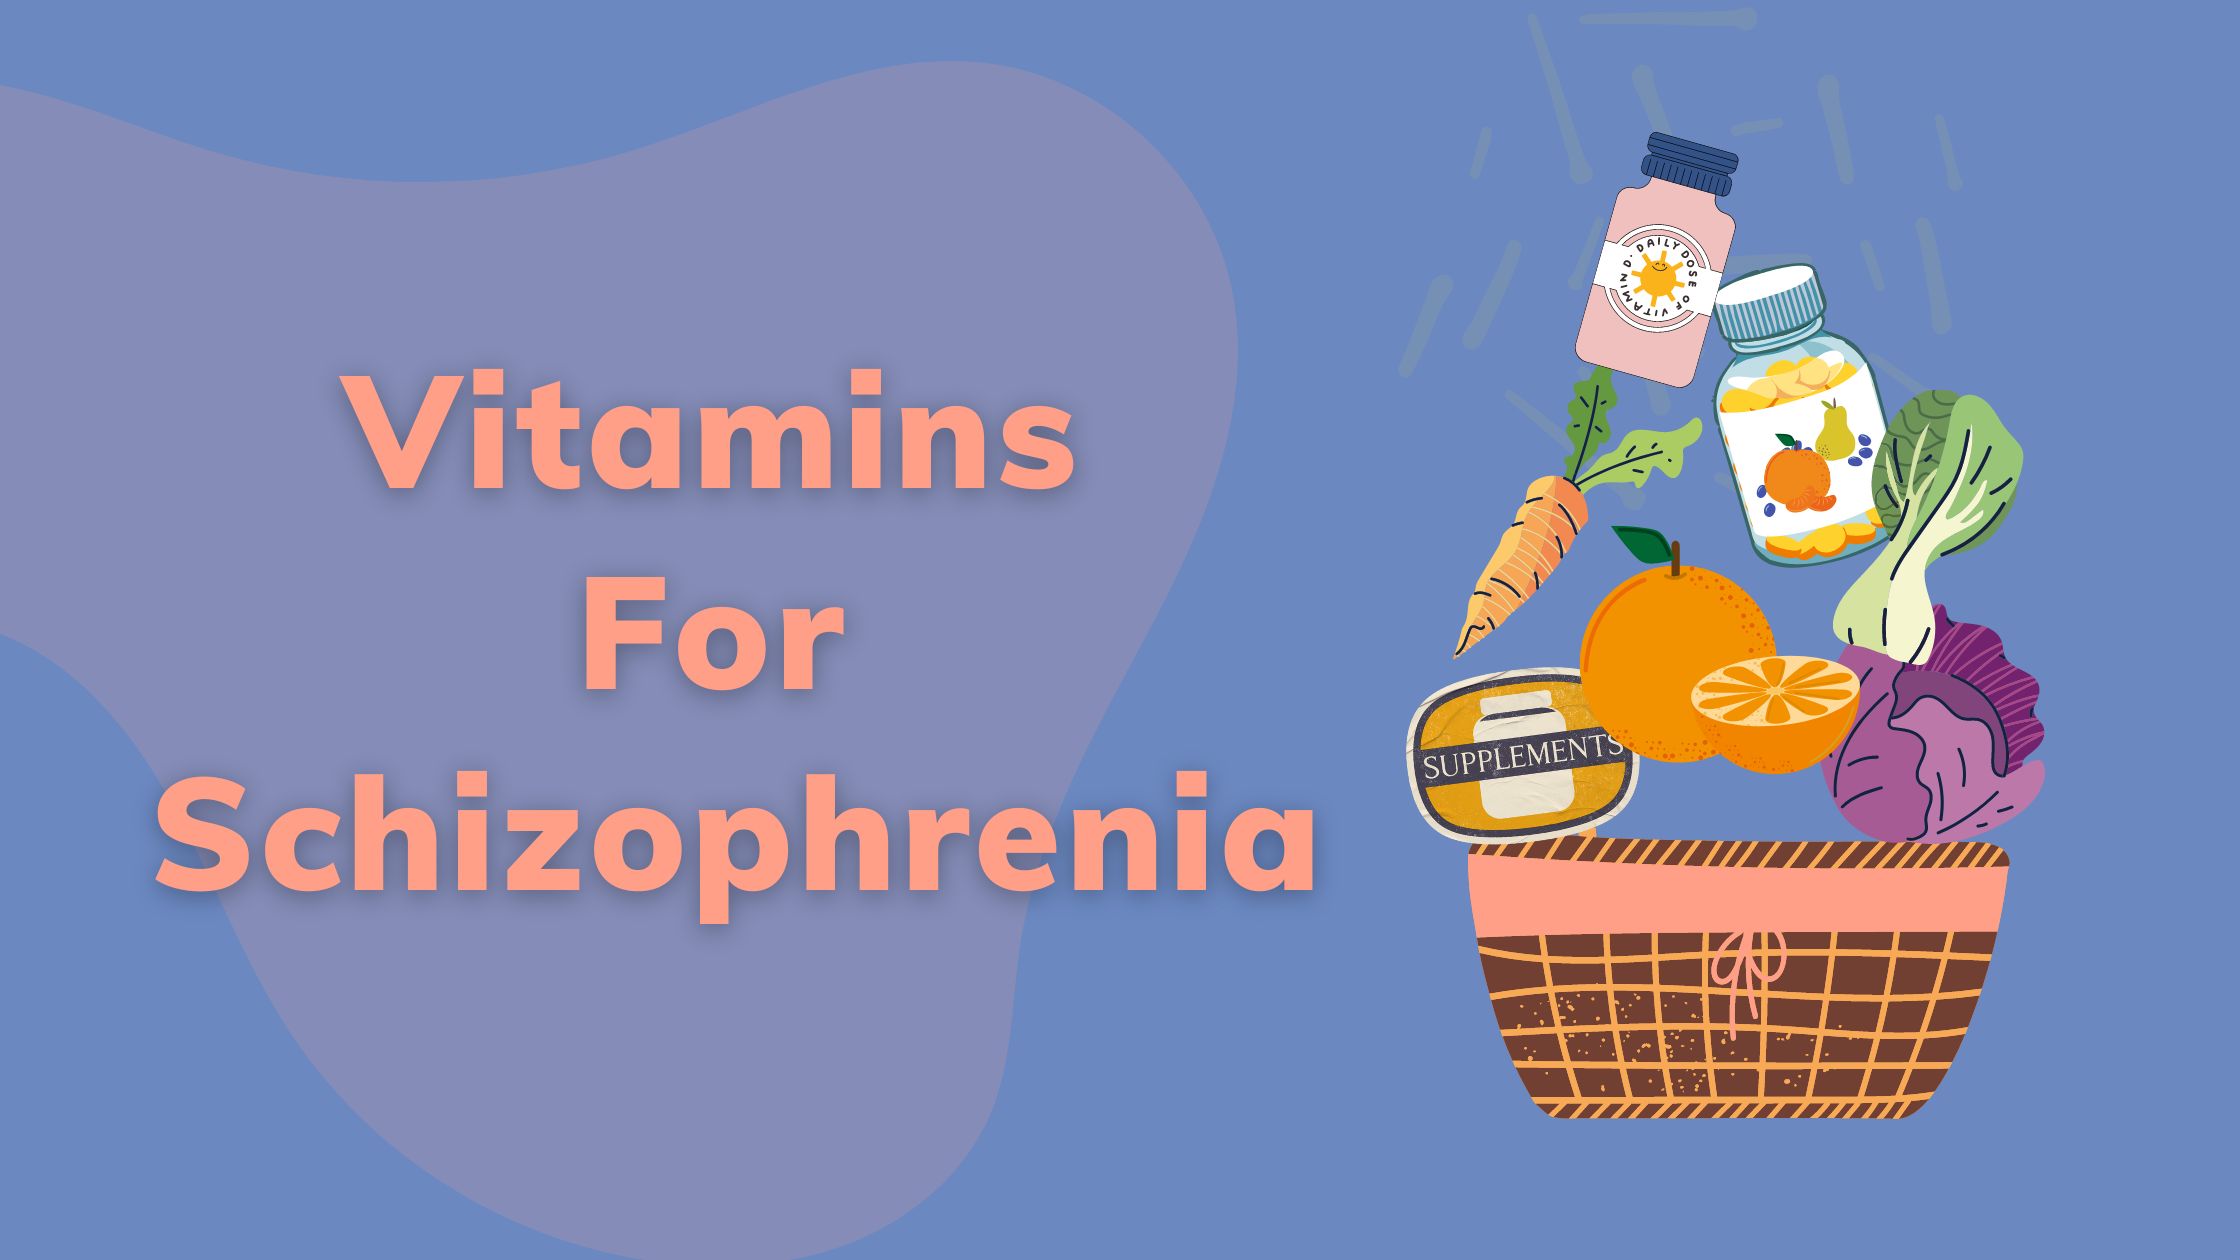 Vitamins, nutrients and supplements for schizophrenia